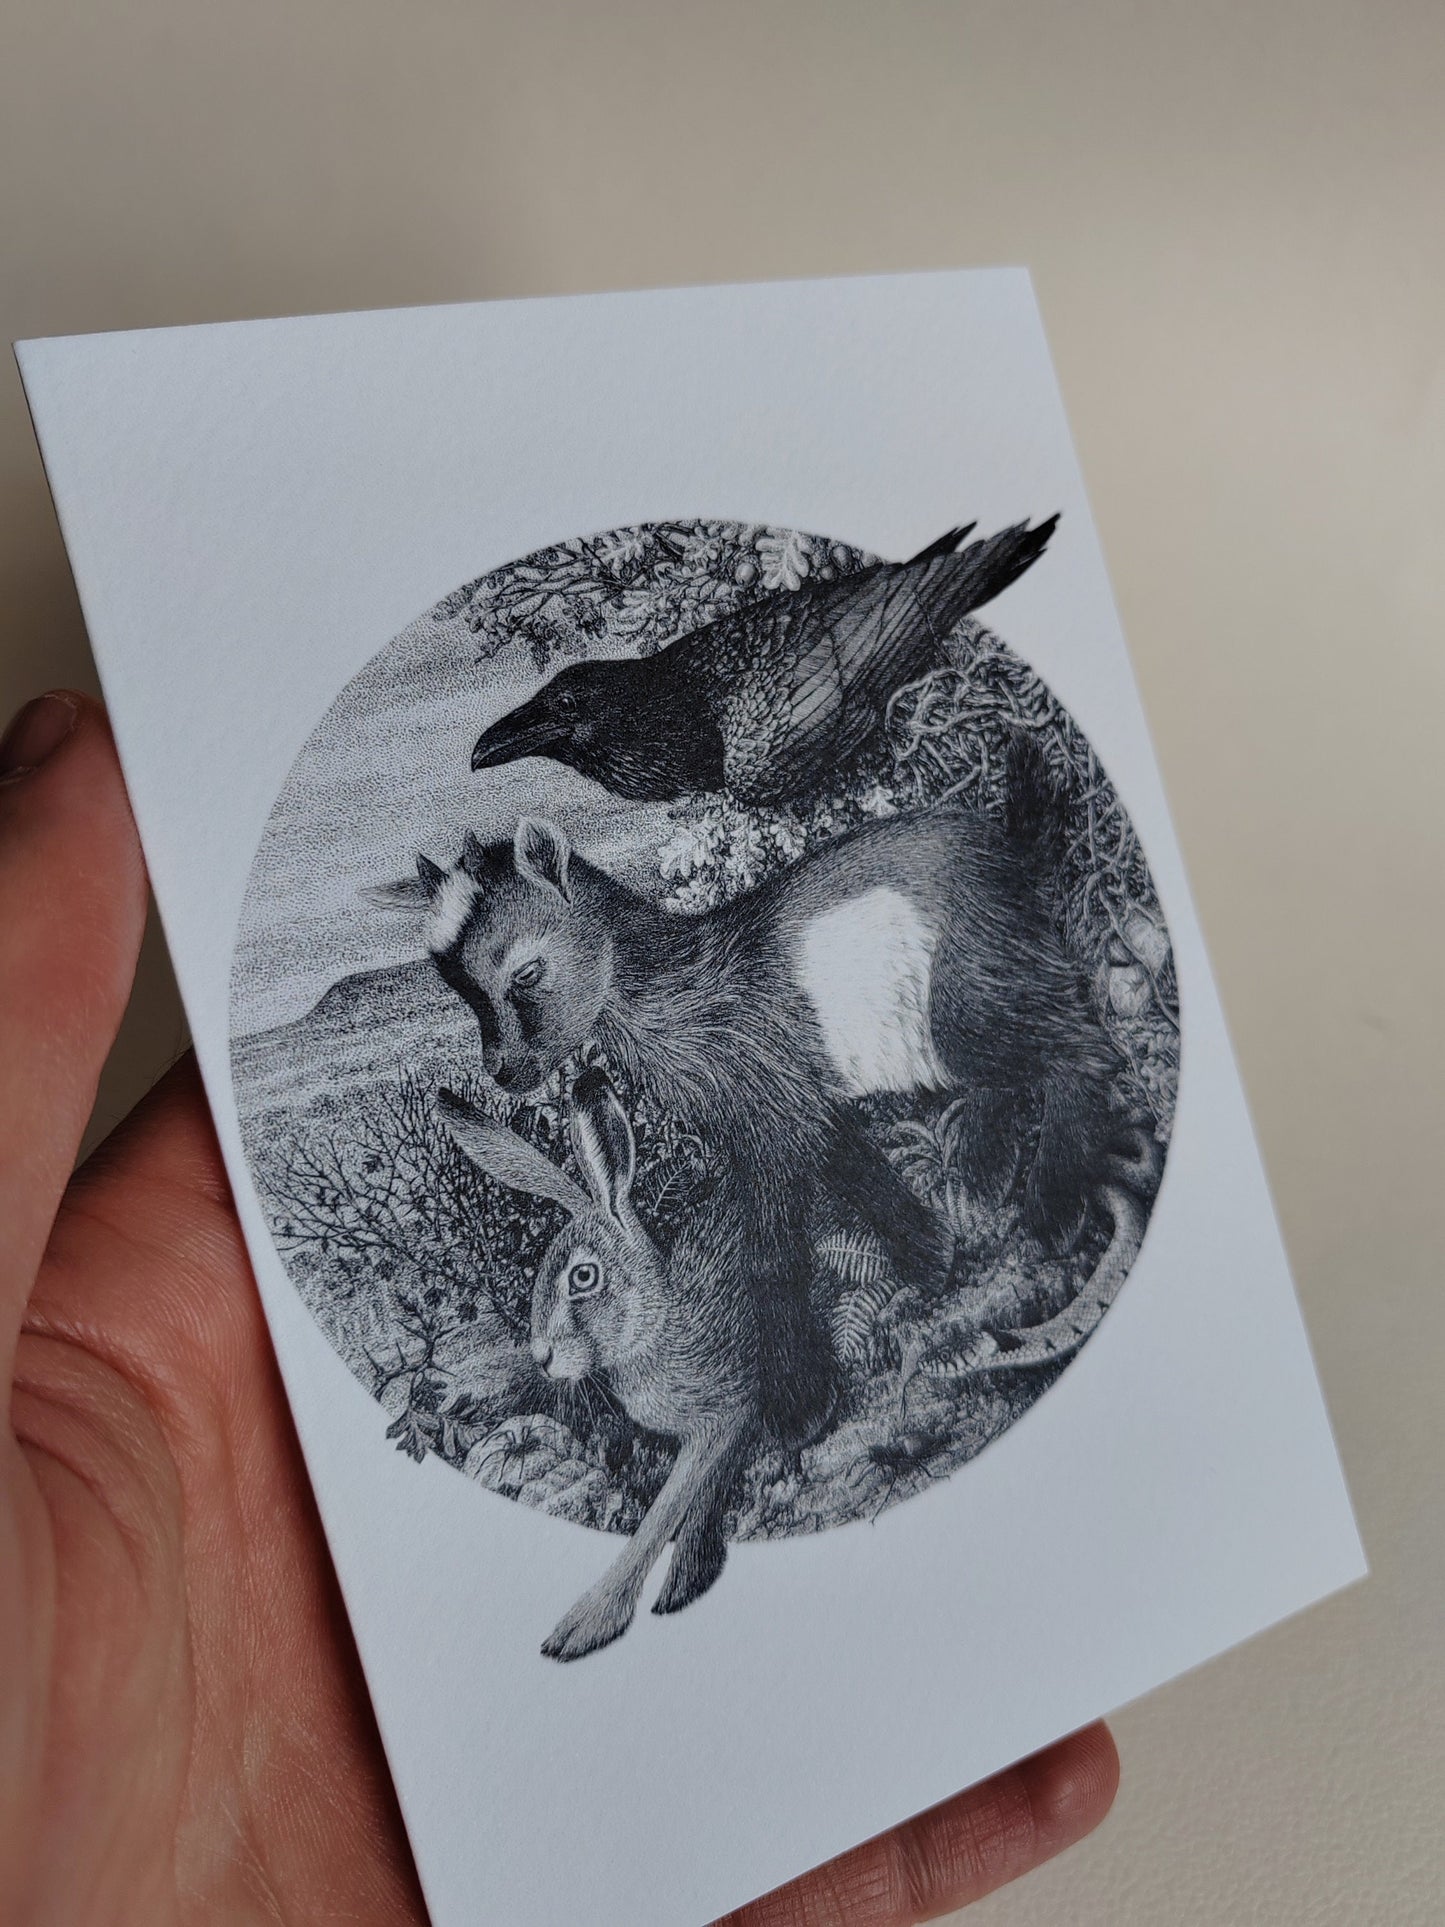 The Magic Returning - Hare, Goat, Raven, Snake Greetings Card, A6 size